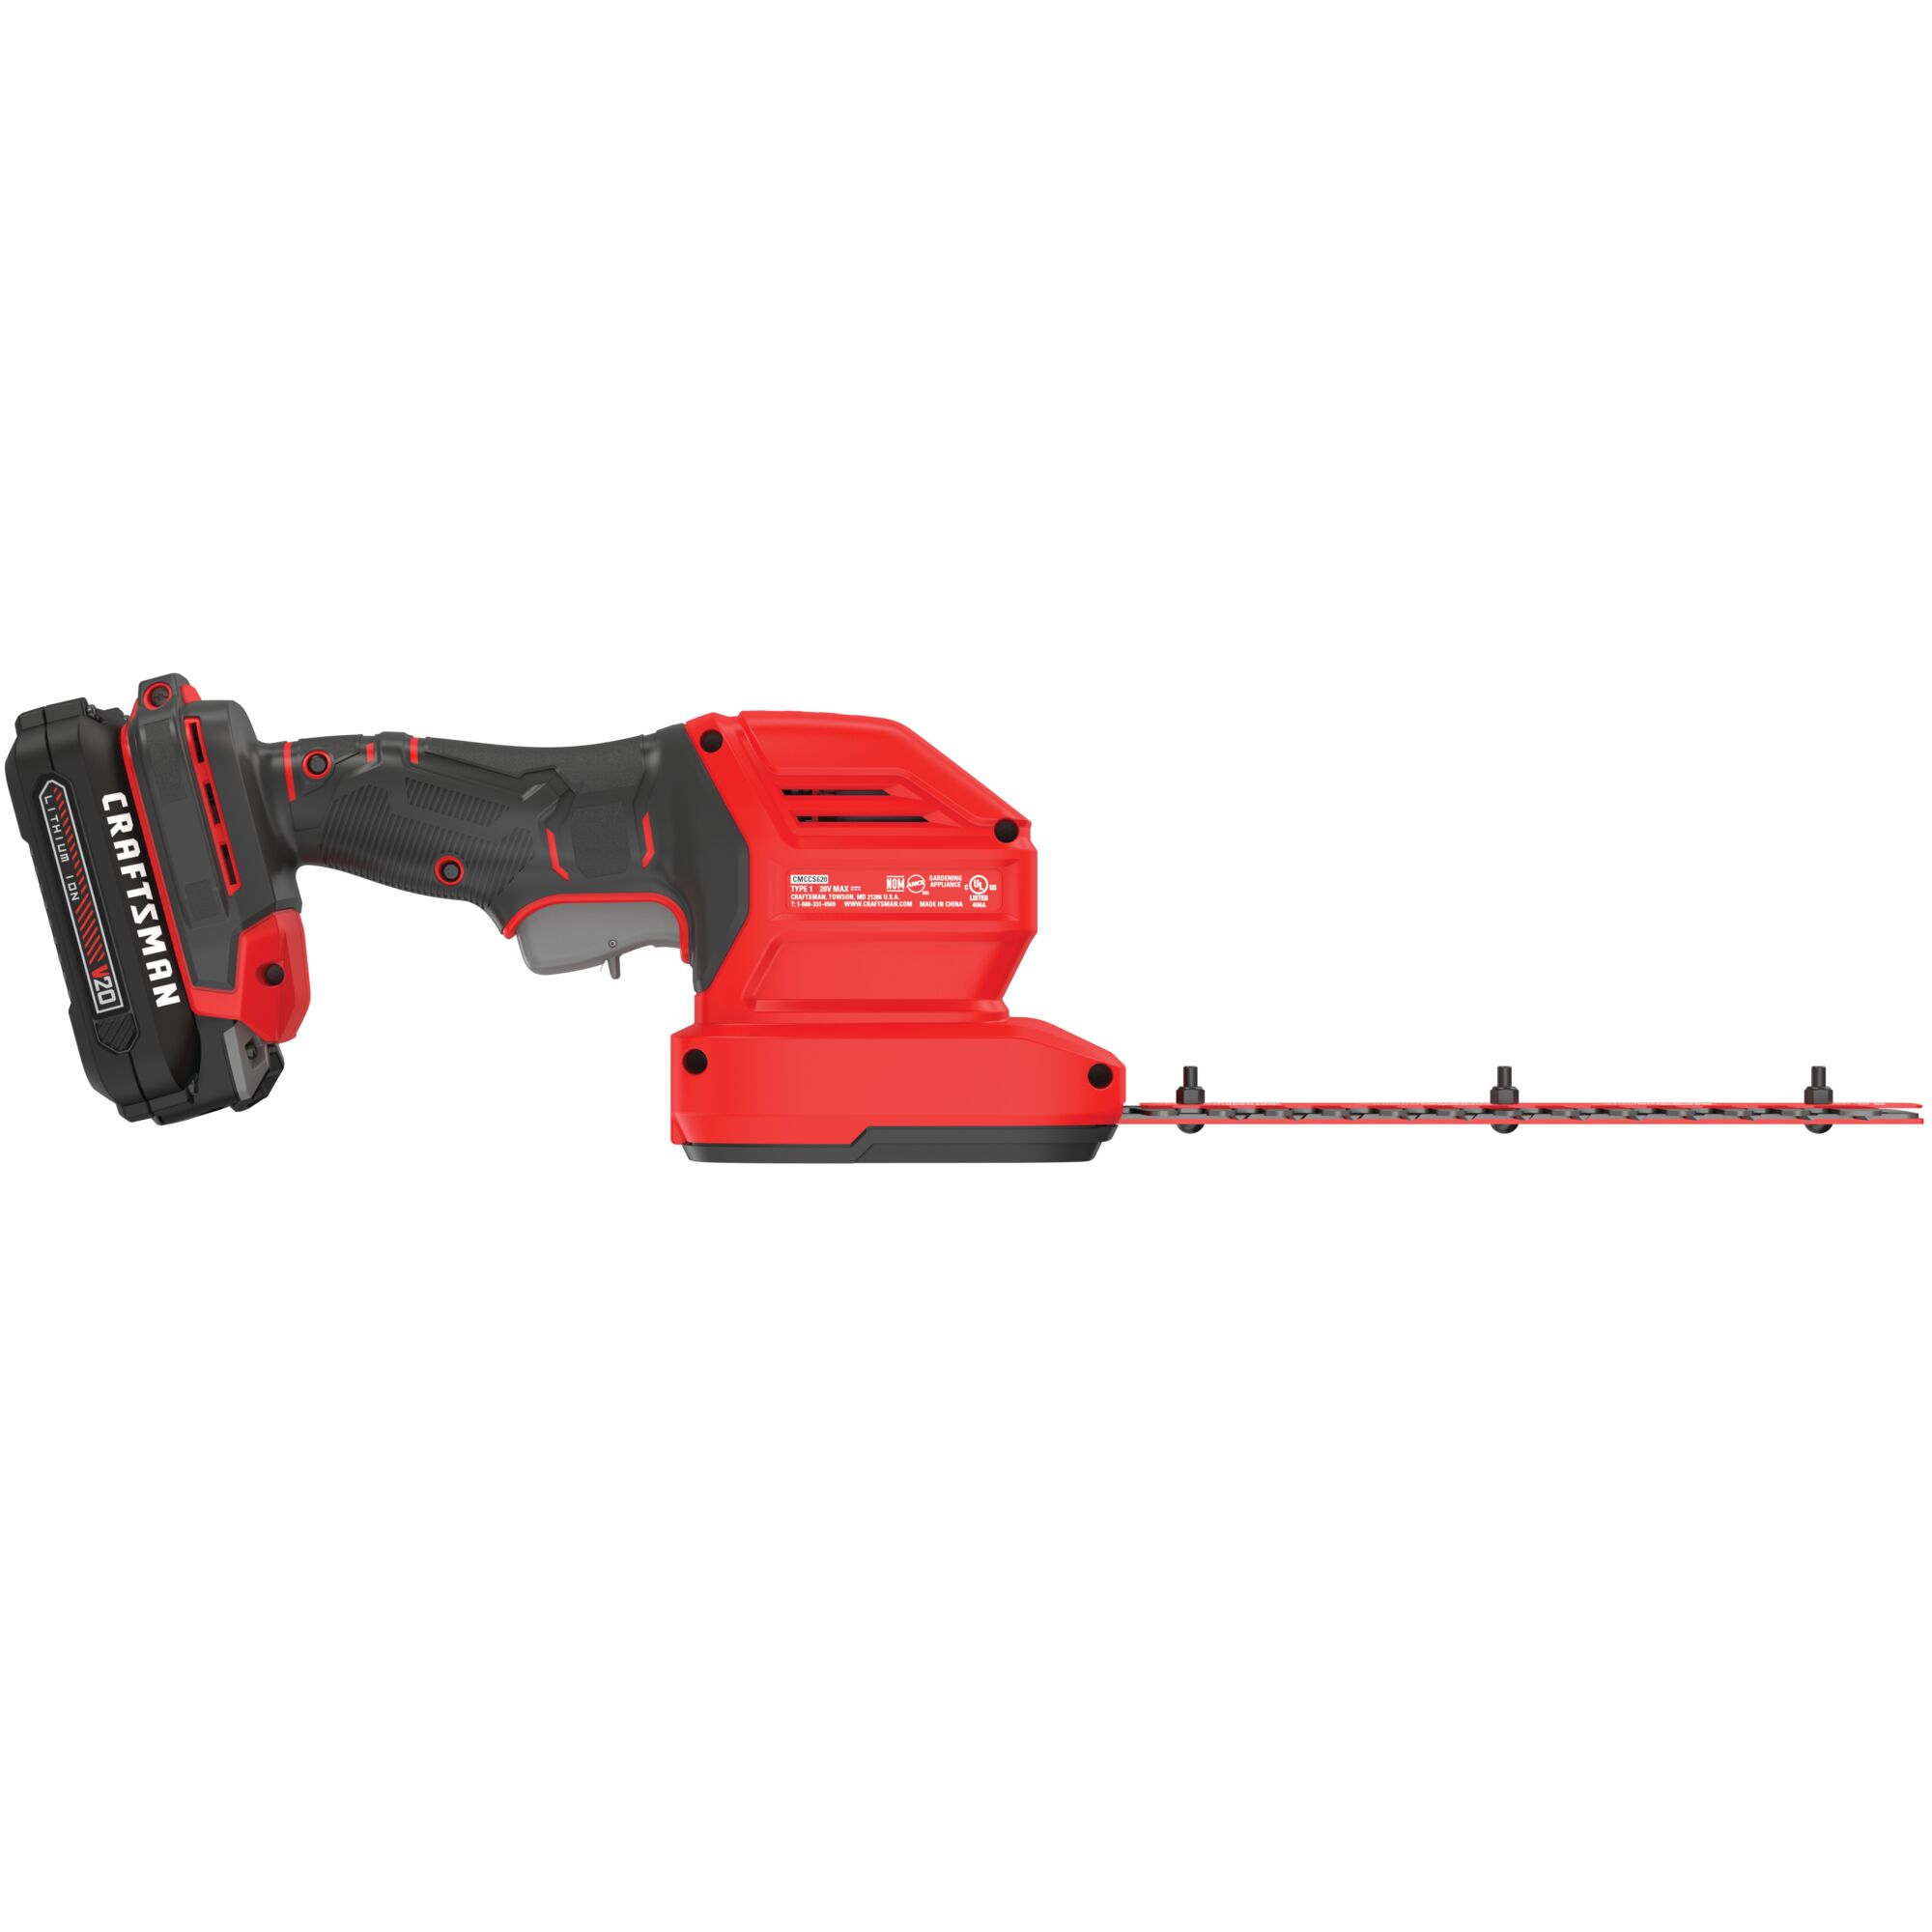 View of CRAFTSMAN Hedge Trimmers on white background